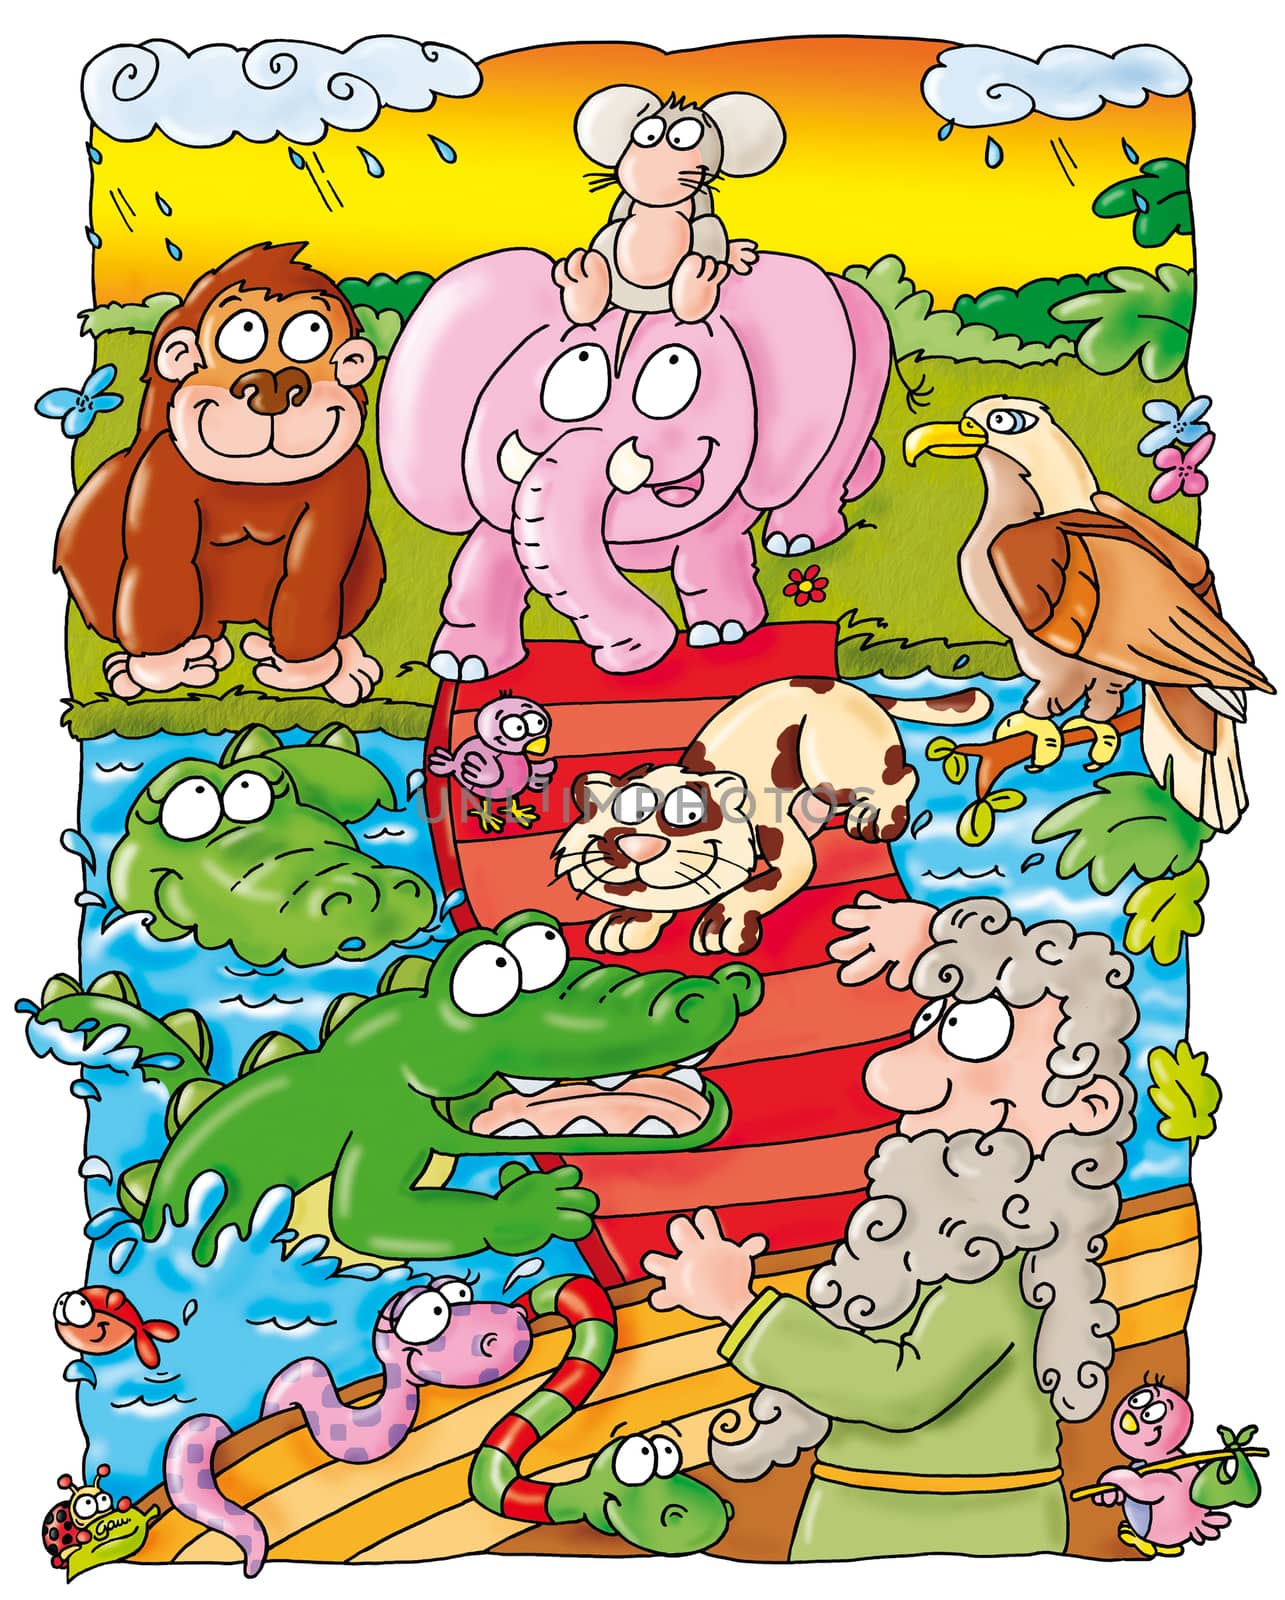 Noah, his ark with happy celebrating animals.
mother, child, drawings, illustrations, stories, books, animals, family, home, park, grass, flowers.